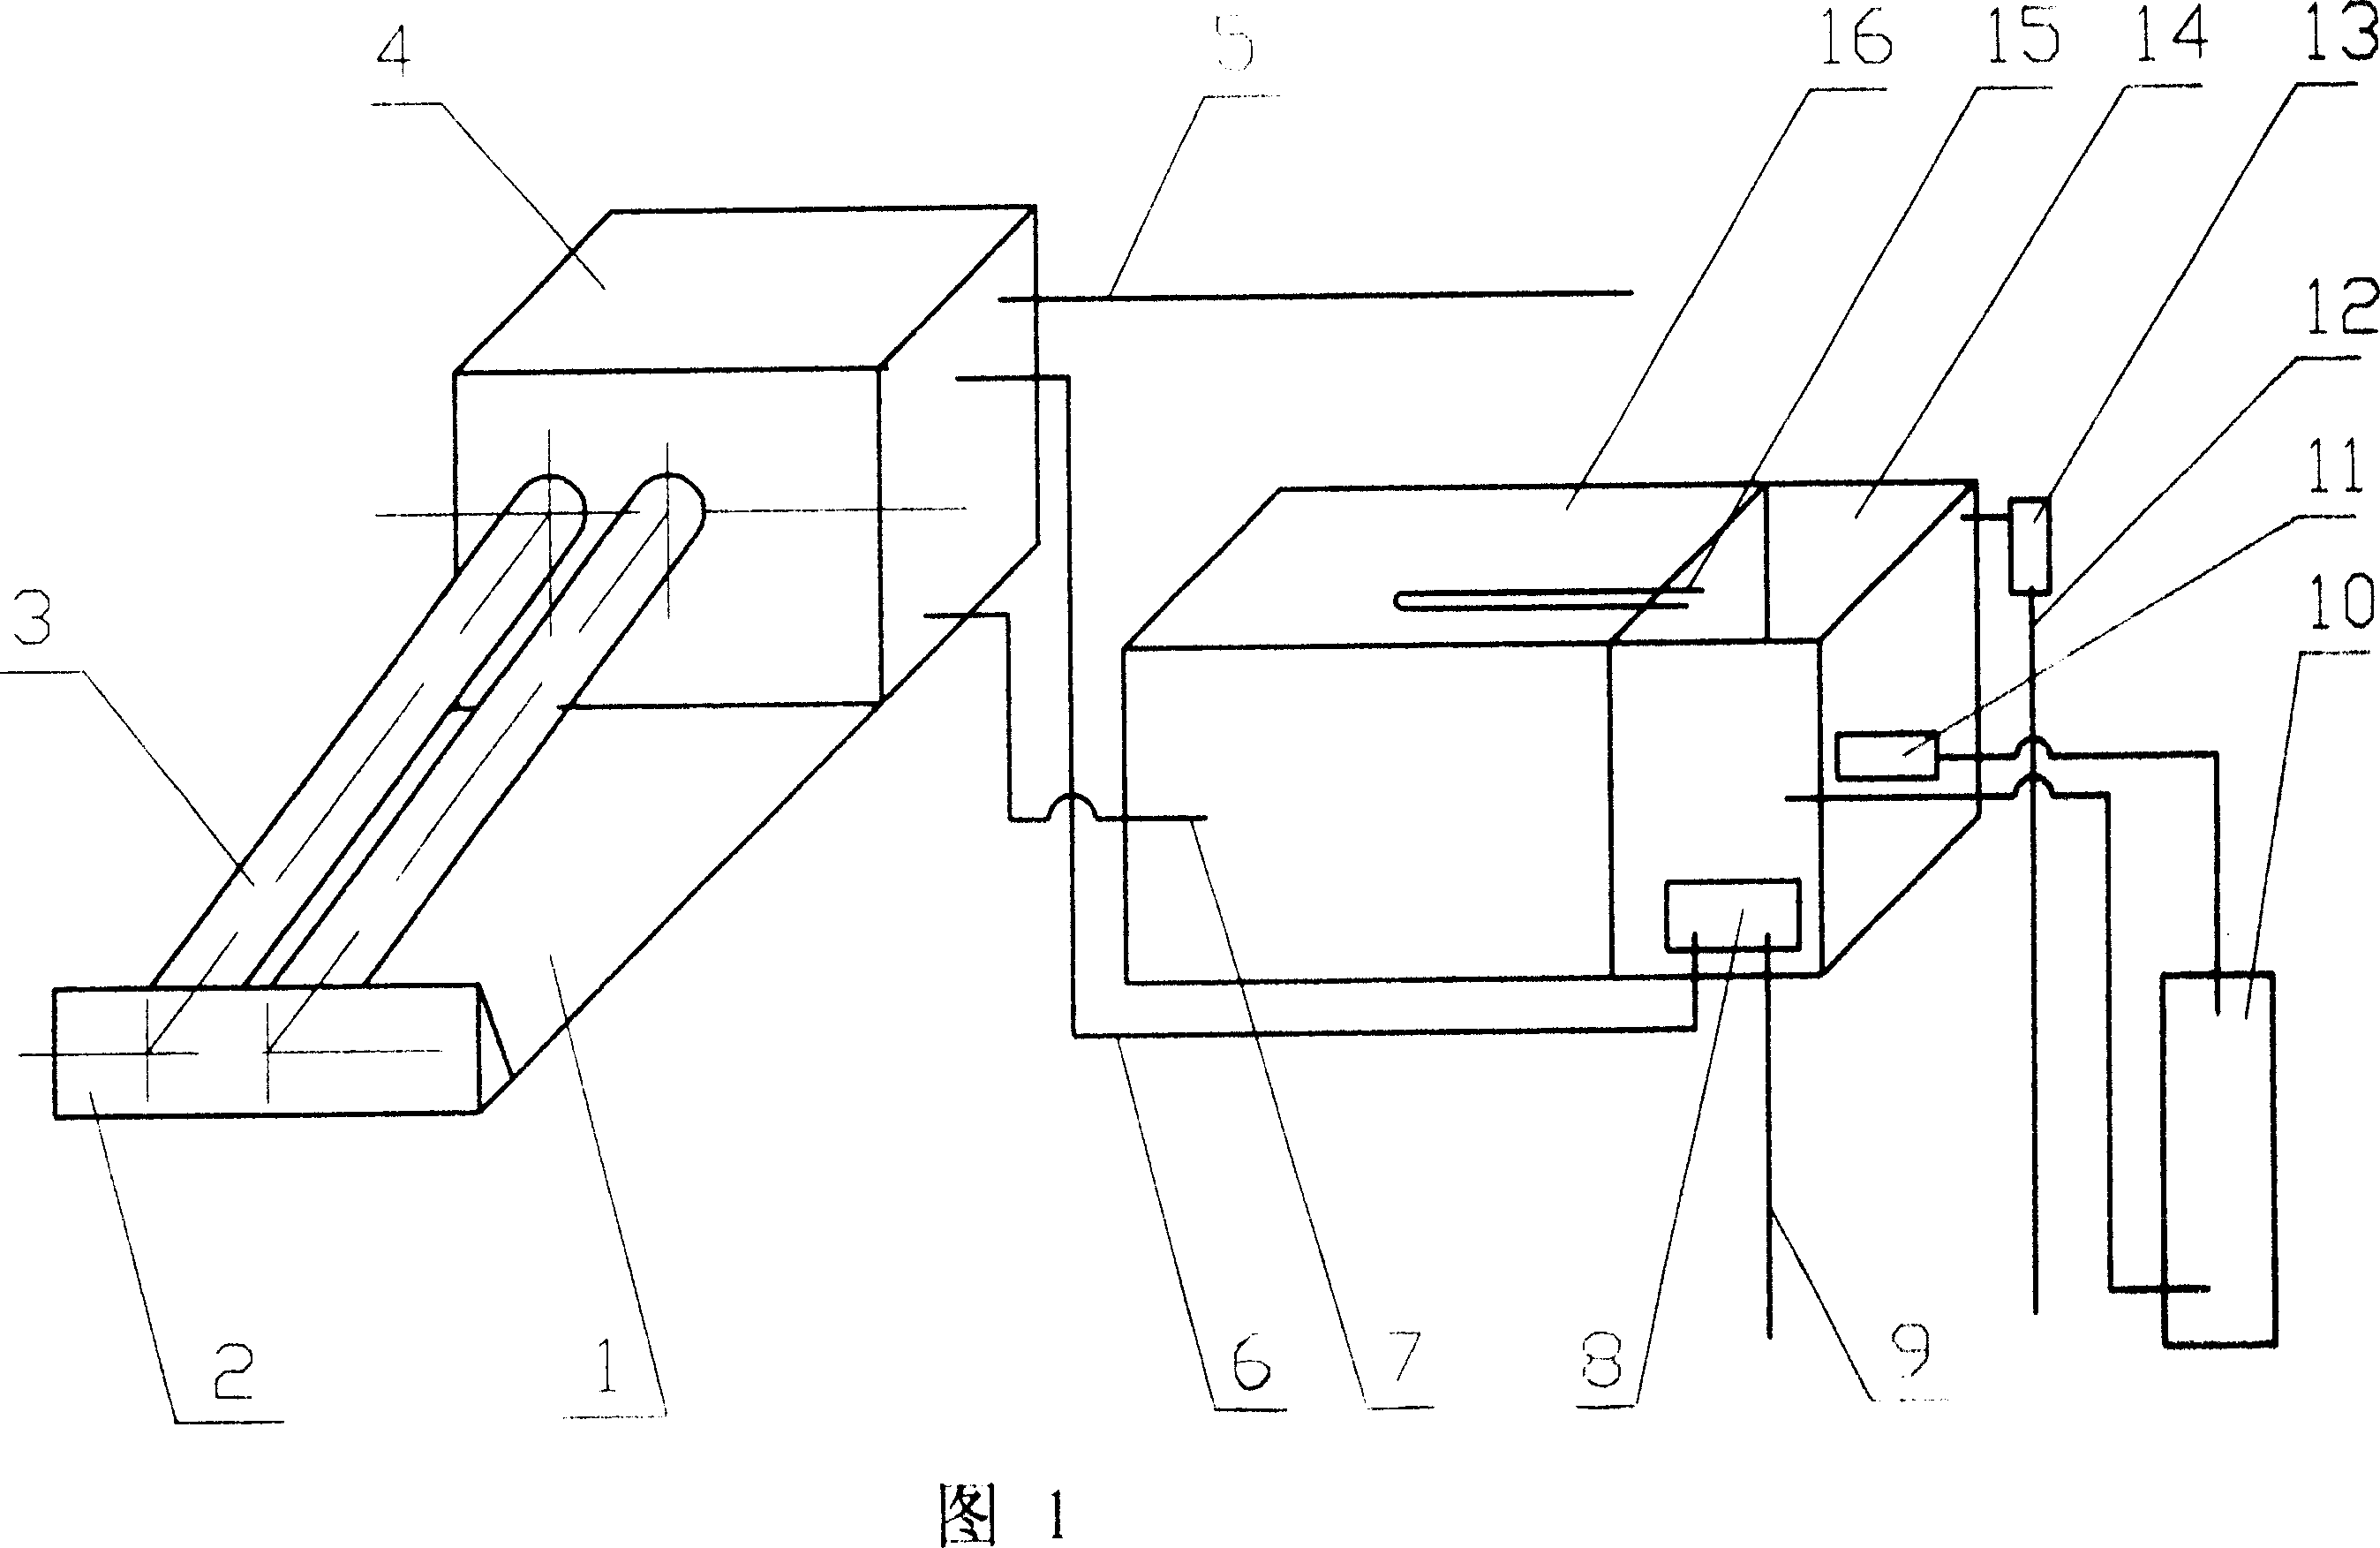 Heating and water supply integrated solar energy apparatus combining electric power